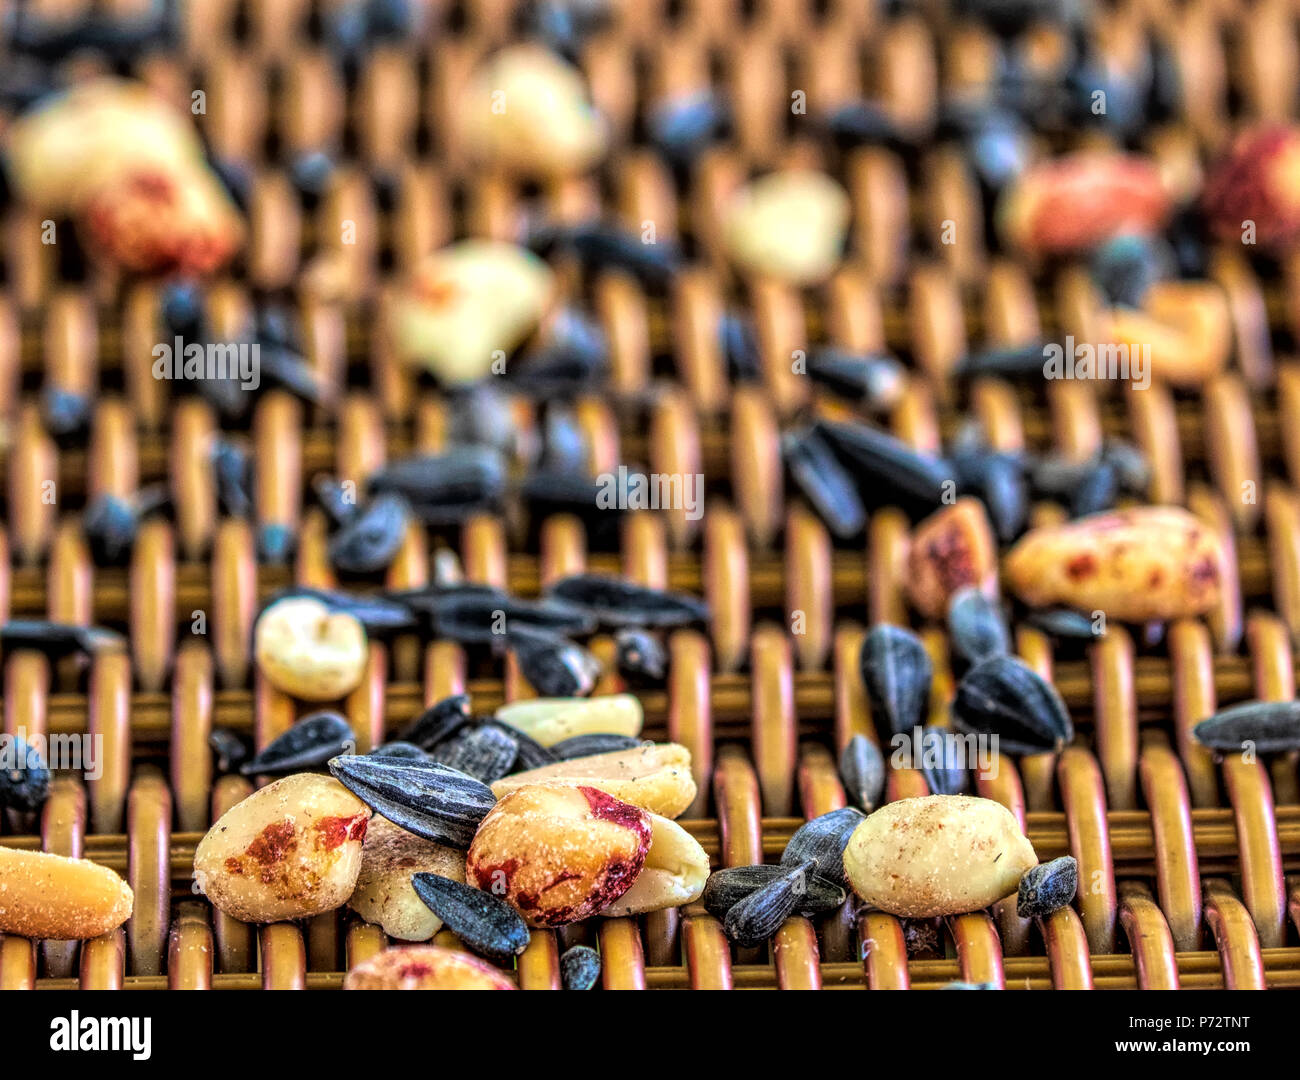 Peanuts and Sunflower Seeds on Outdoor Table Stock Photo